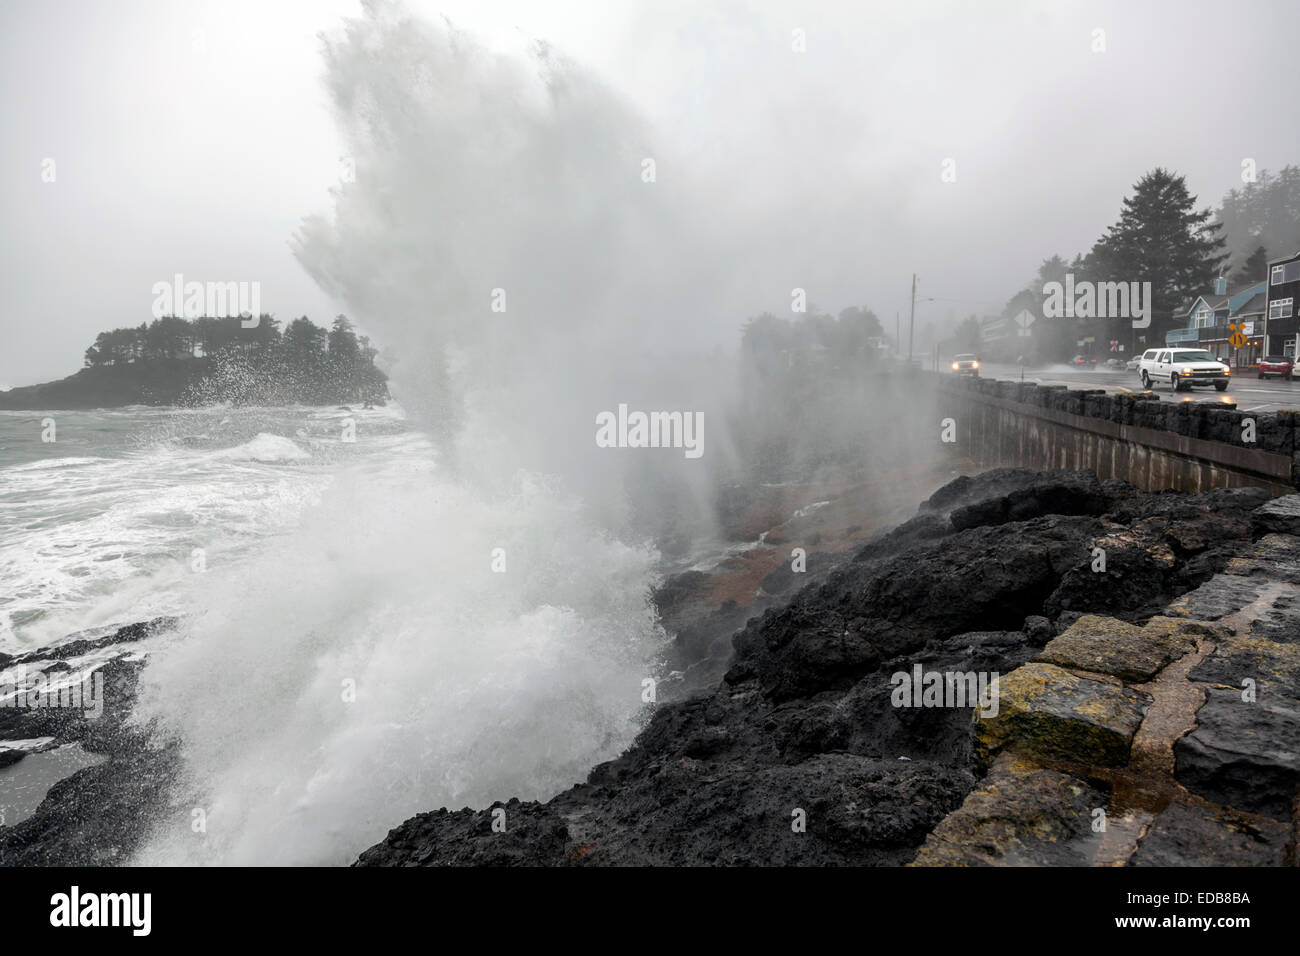 Stormy surf crashes on the rocky Pacific shoreline and seawall, washing over U.S. Route 101 and car in Depoe Bay, Oregon, USA. Stock Photo